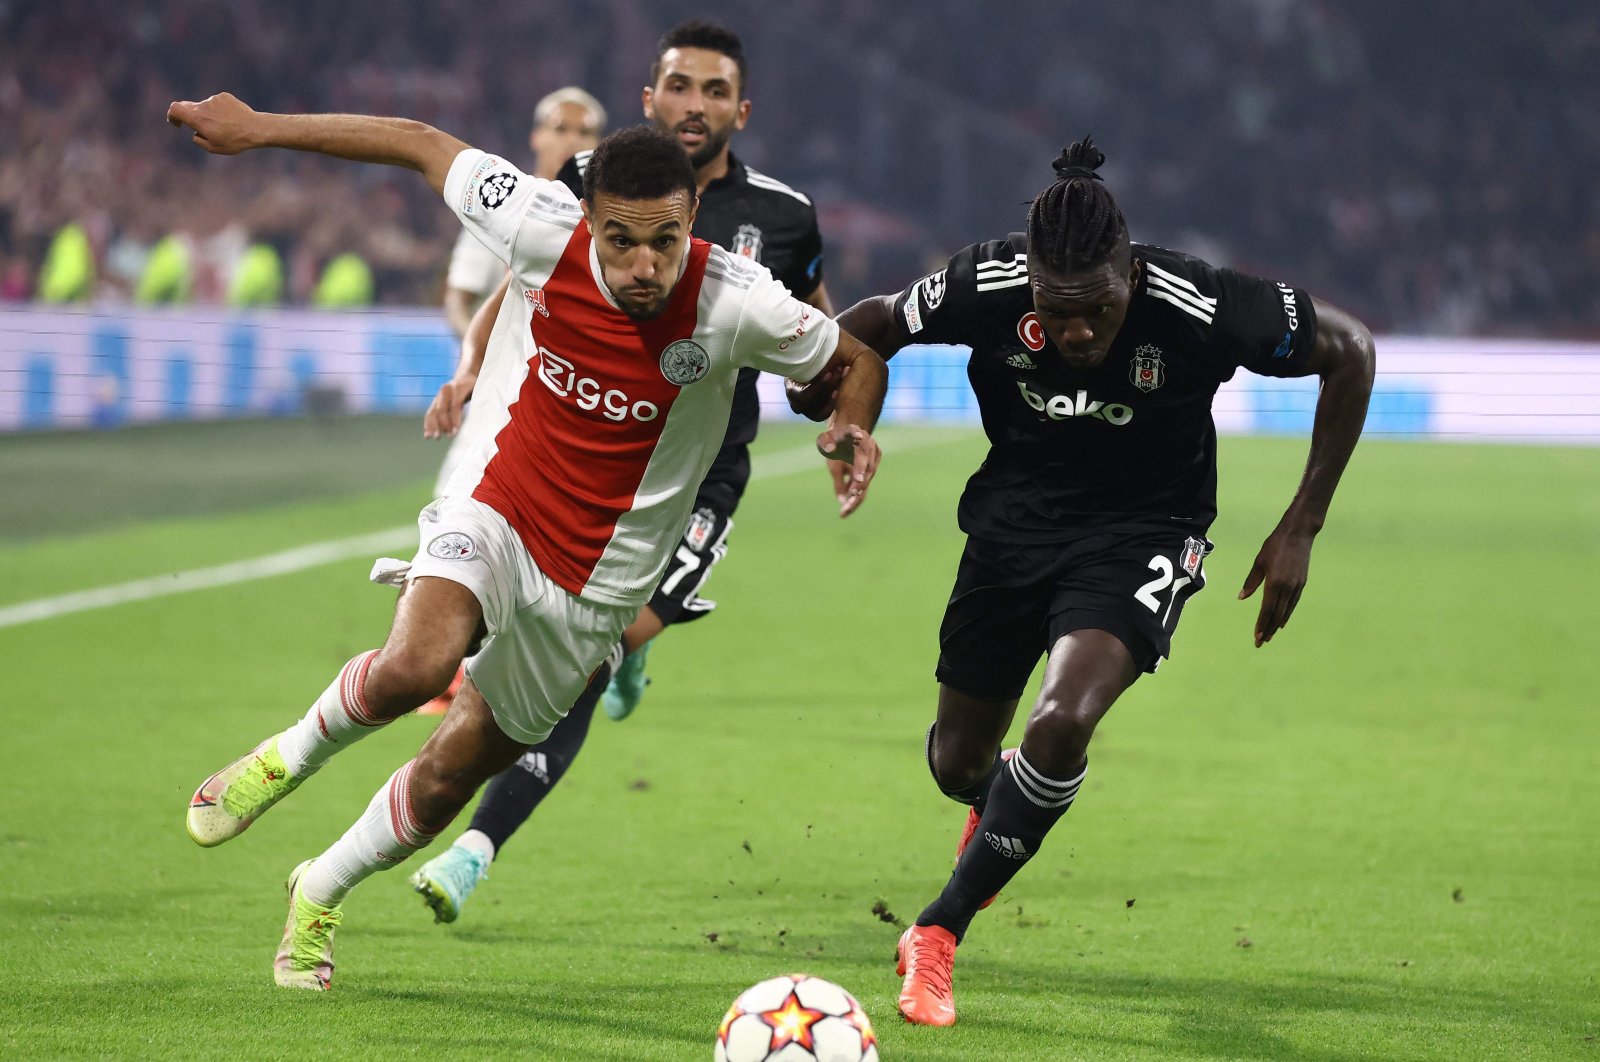 Ajax's Noussair Mazraoui (L) fights for the ball with Besiktaş's Fabrice N'Sakala during a Champions League match at The Johan Cruijff Arena in Amsterdam, the Netherlands, Sept. 28, 2021. (AFP Photo)